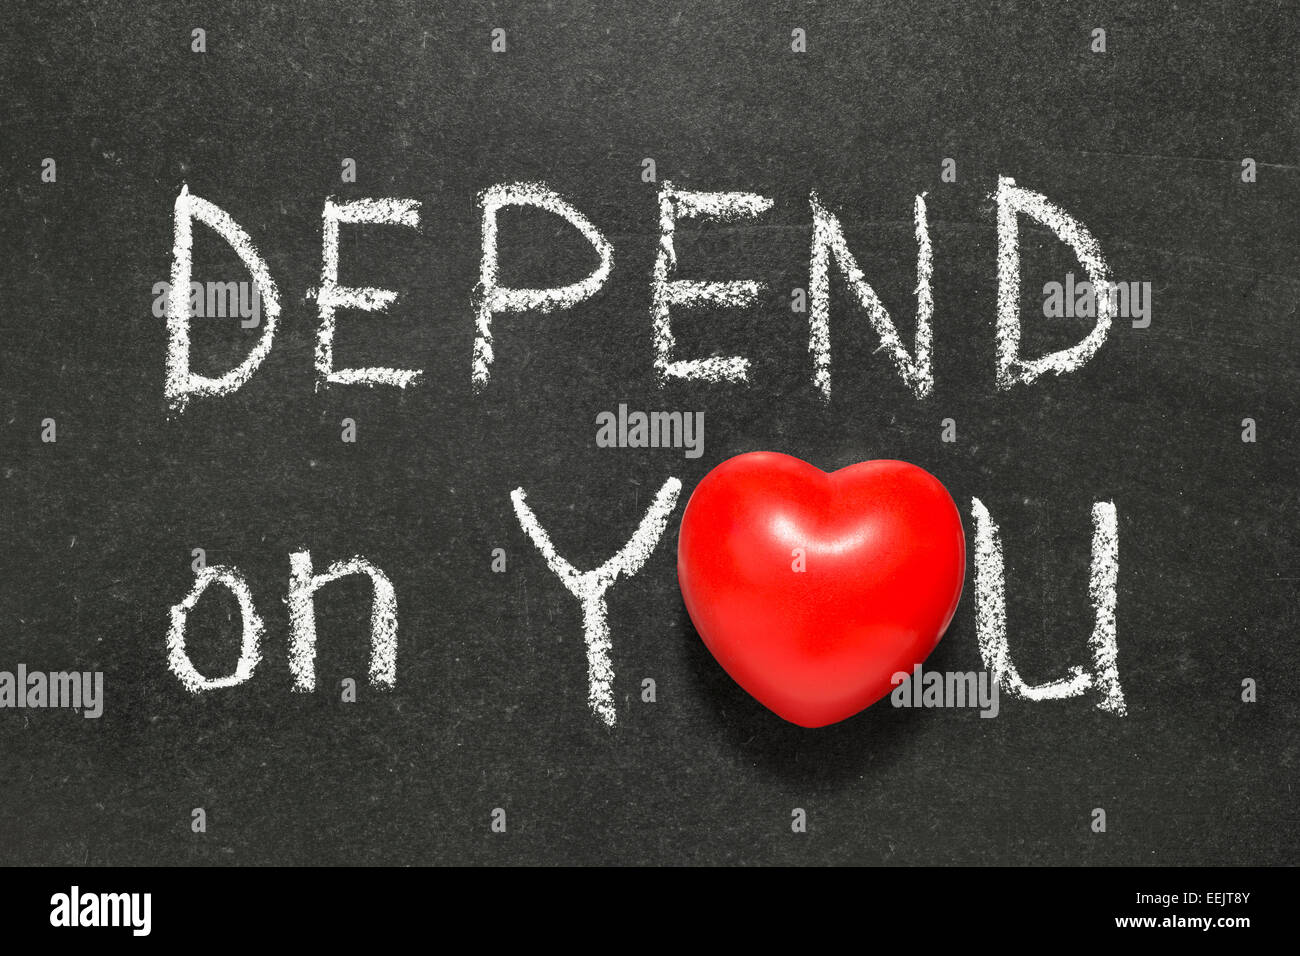 depend on you phrase phrase handwritten on blackboard with heart symbol instead of O Stock Photo